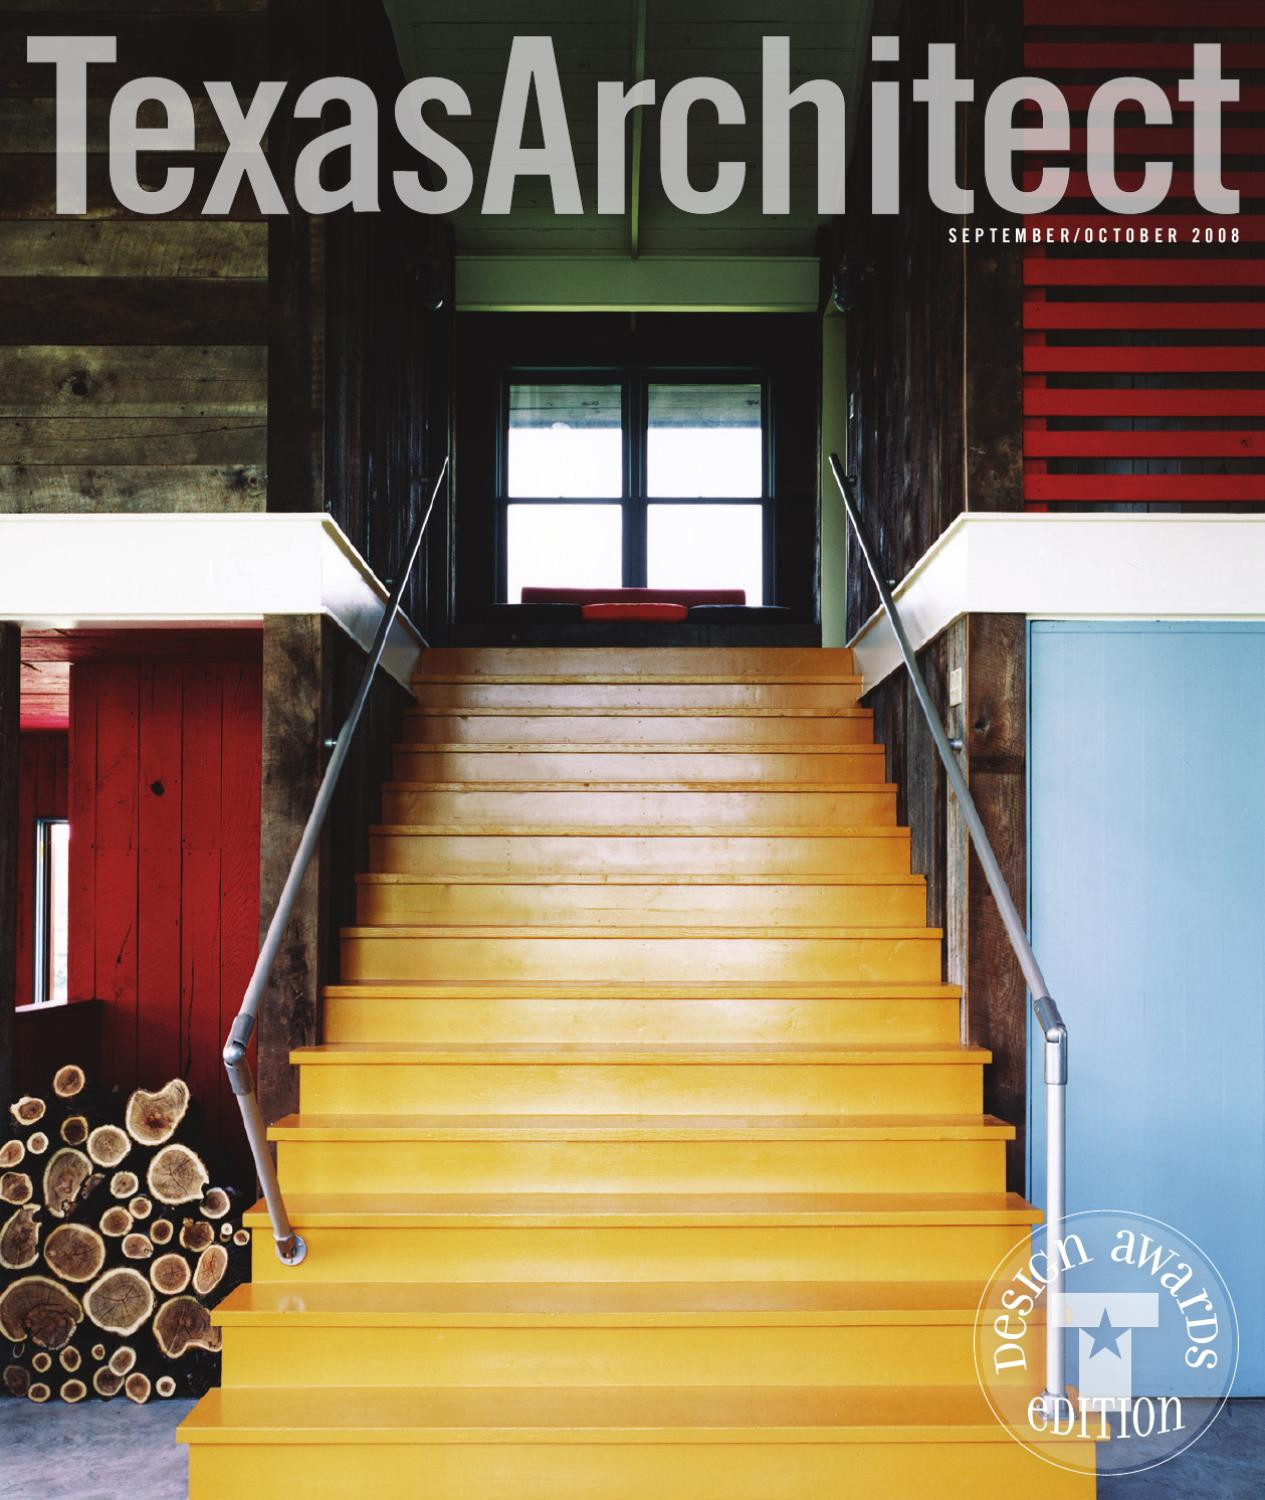 30 Lovely forest Accents Hardwood Flooring Reviews 2024 free download forest accents hardwood flooring reviews of texas architect sept oct 2008 design awards by texas society of regarding texas architect sept oct 2008 design awards by texas society of architec